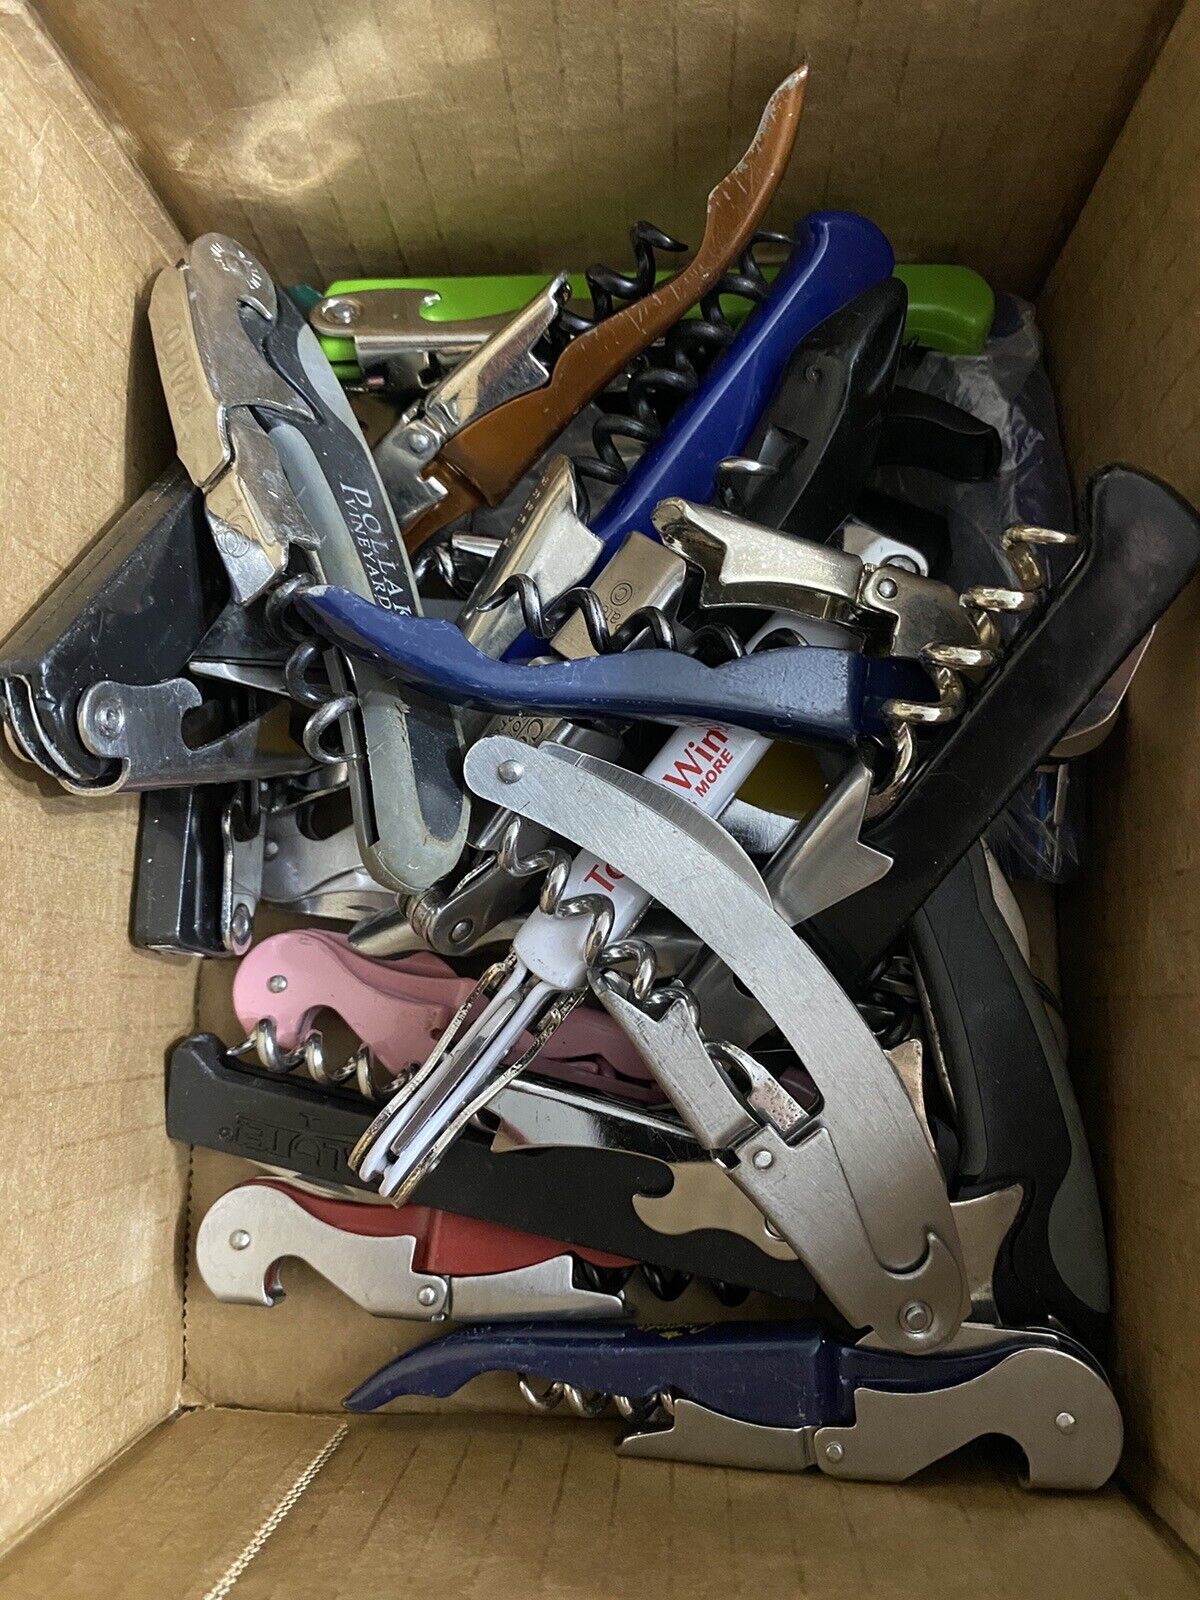 Lot of 50 CORKSCREW, Stainless, Waiter\'s Friend Openers they are mixed, USED